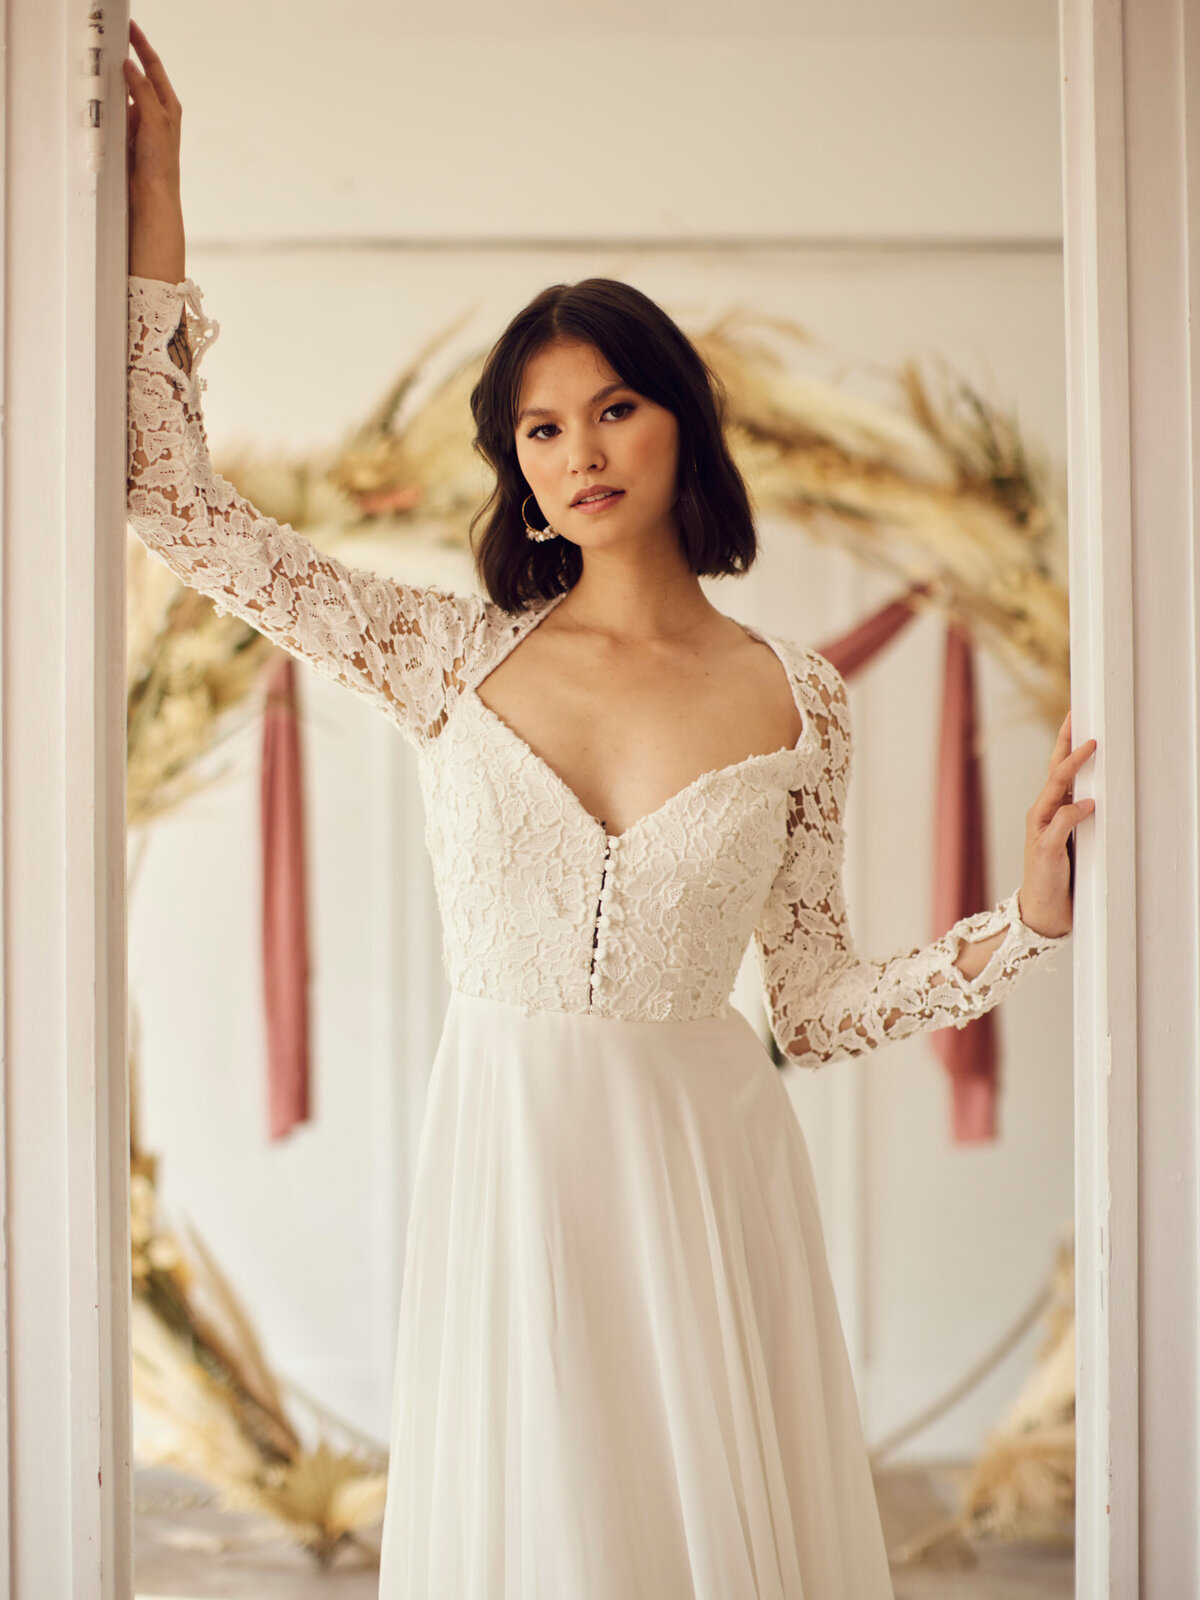 Elegant and vintage inspired bridal gown, from Lovenote Bride, a modern bridal boutique based in Calgary + Vancouver. Featured on the Brontë Bride Vendor Guide.